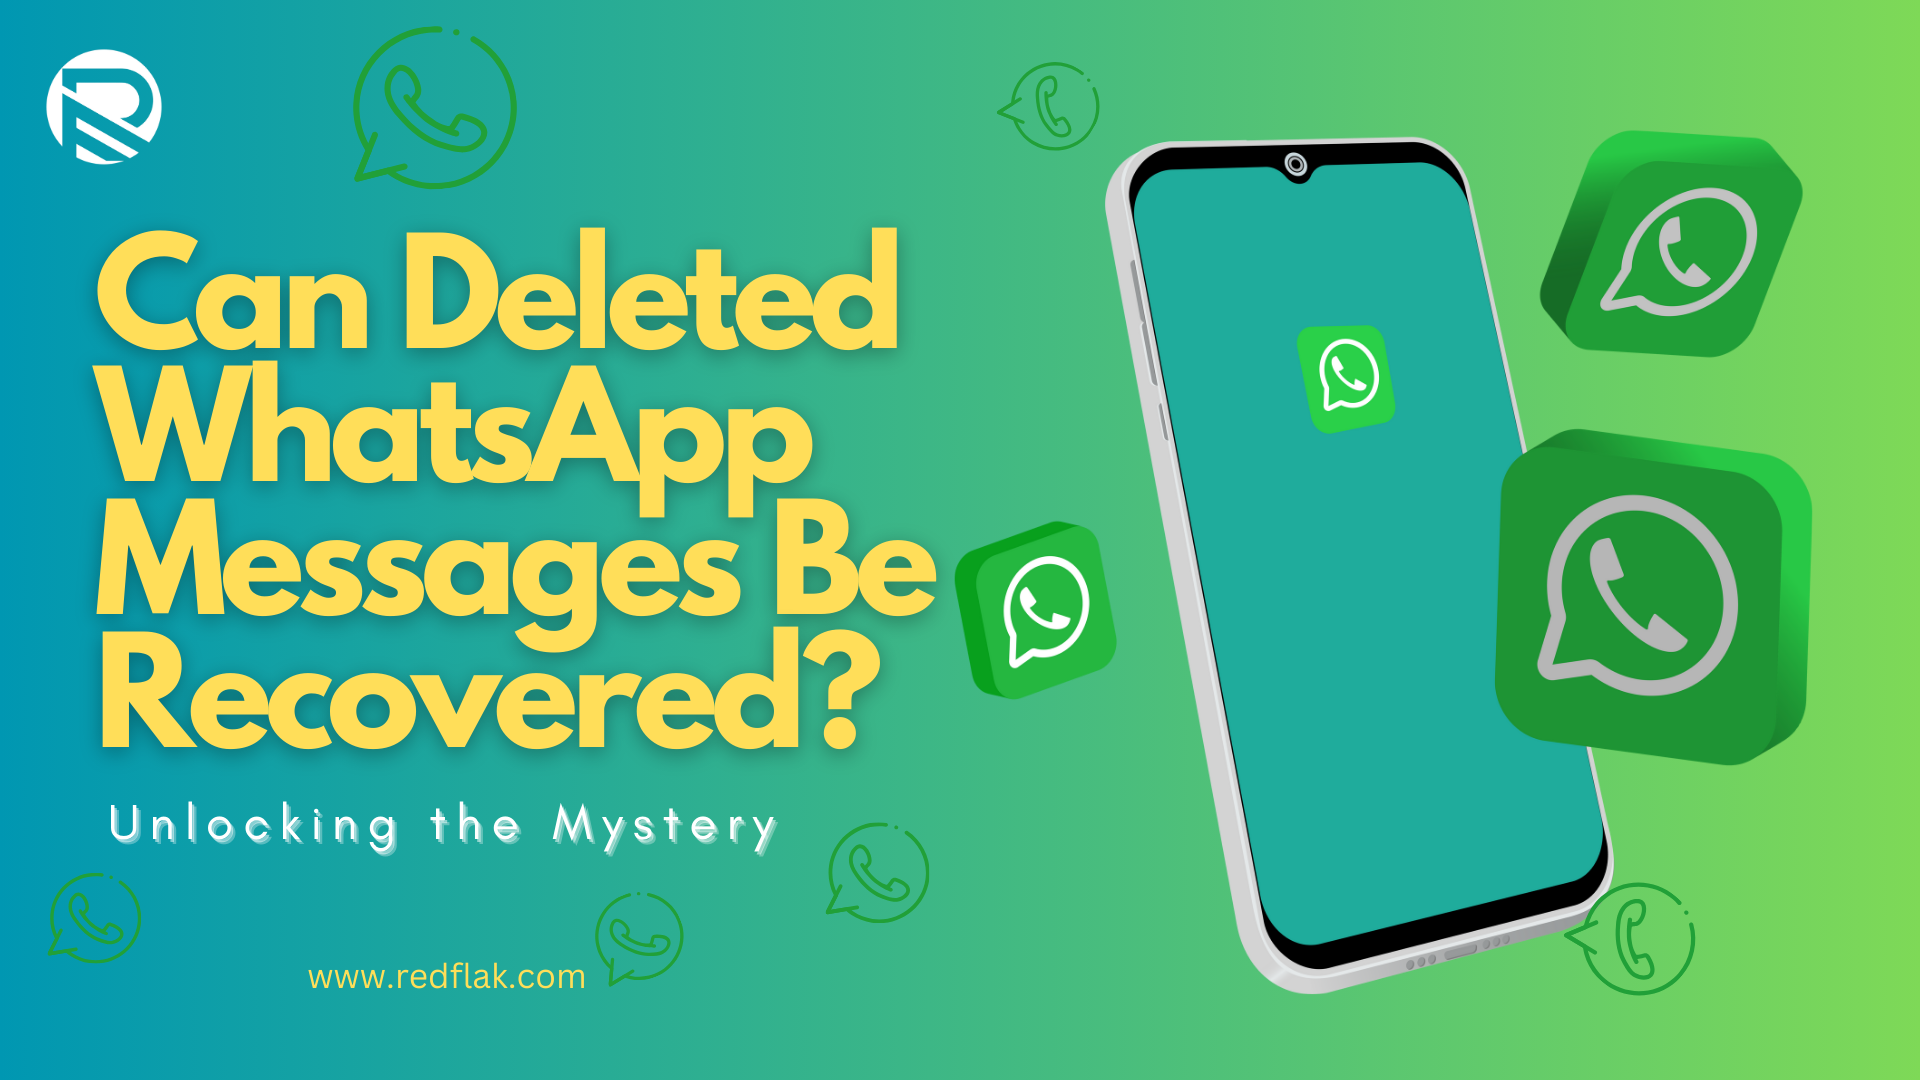 Ever accidentally deleted a crucial WhatsApp message?